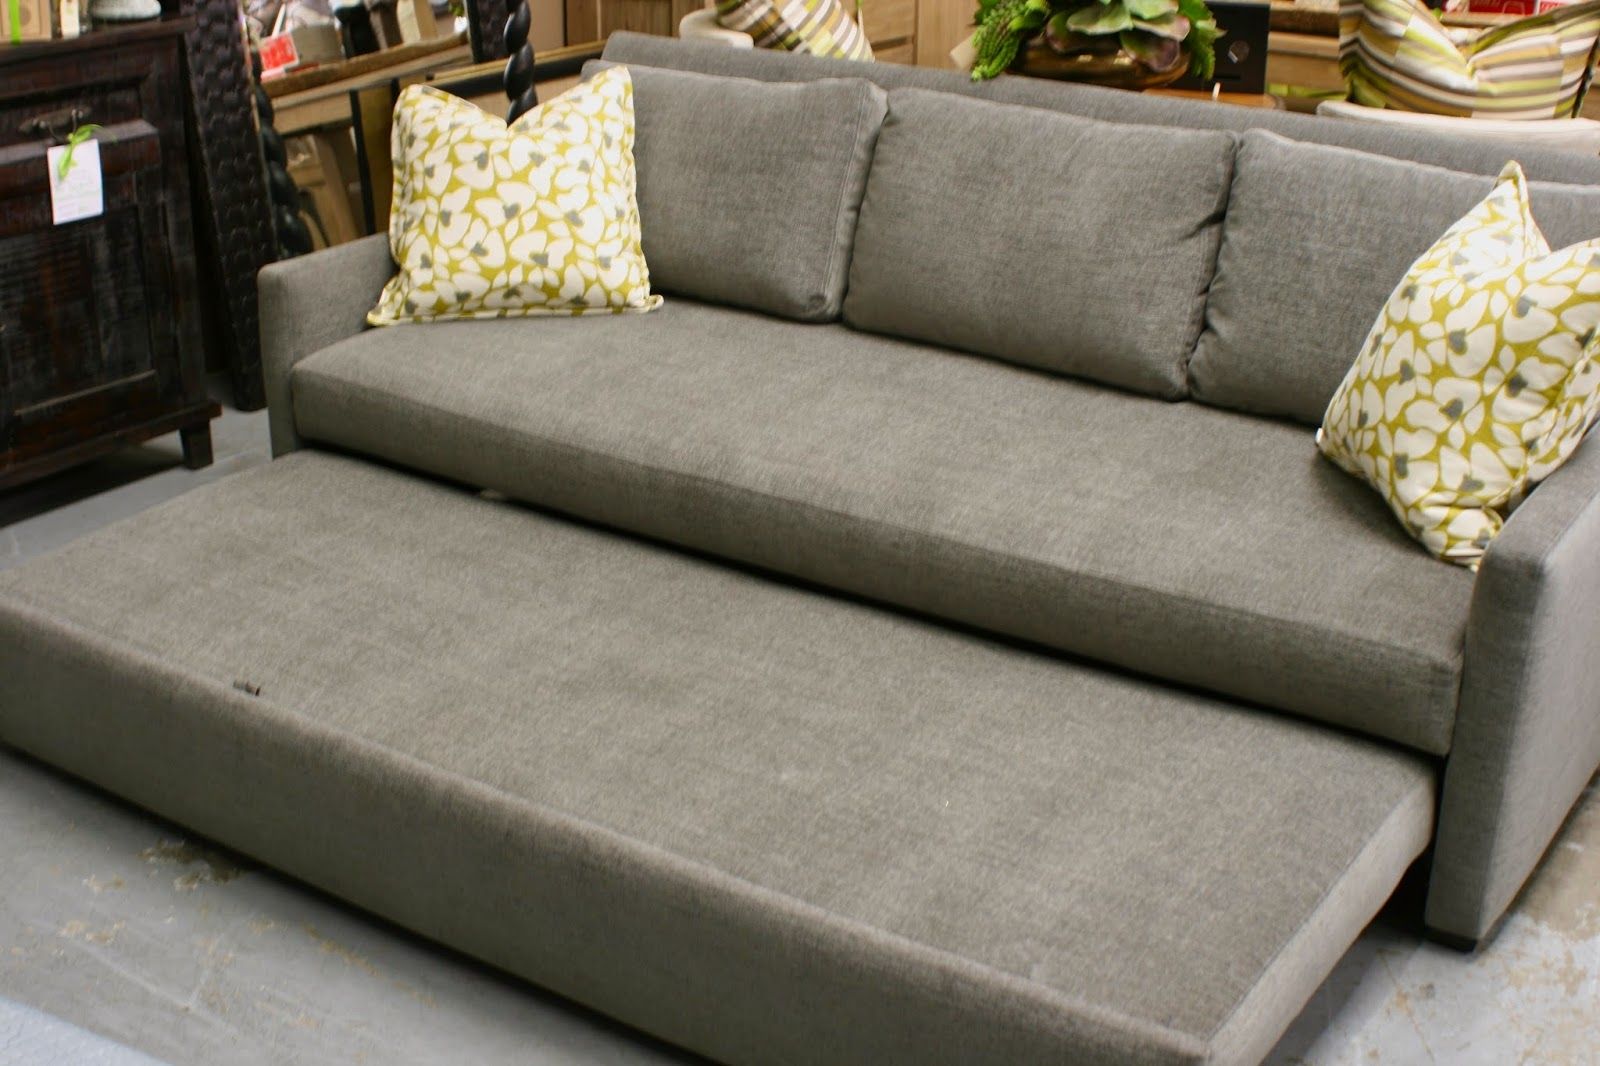 Queen Size Convertible Sofa Bed – Ideas On Foter Inside Queen Size Convertible Sofa Beds (Gallery 2 of 20)